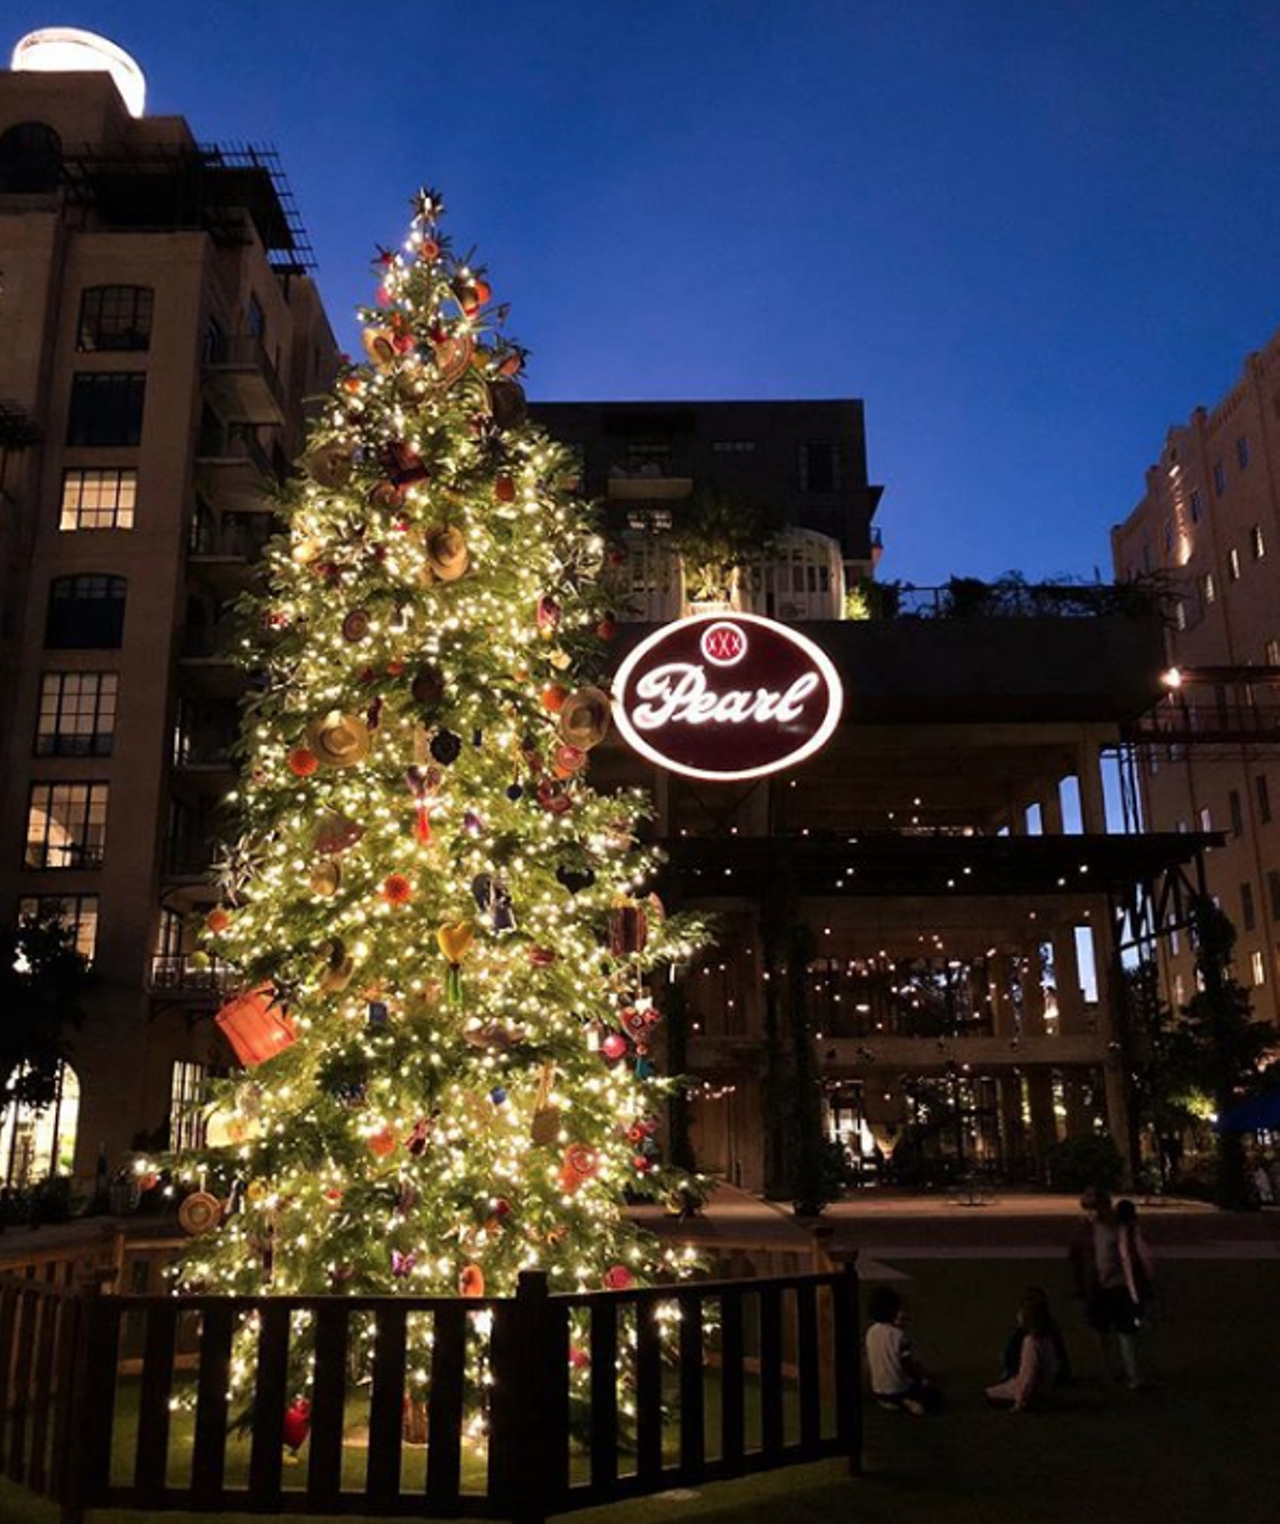 The Historic Pearl
303 Pearl Pkwy., atpearl.com
In the heart of the Pearl you’ll find a tall, decked out Christmas tree. You’re going to the Pearl anyway, so you might as well get a few selfies in front of the tree. You can also catch seasonal events like the Holiday Night Market and Chanukah at Pearl.
Photo via Instagram / historicpearl